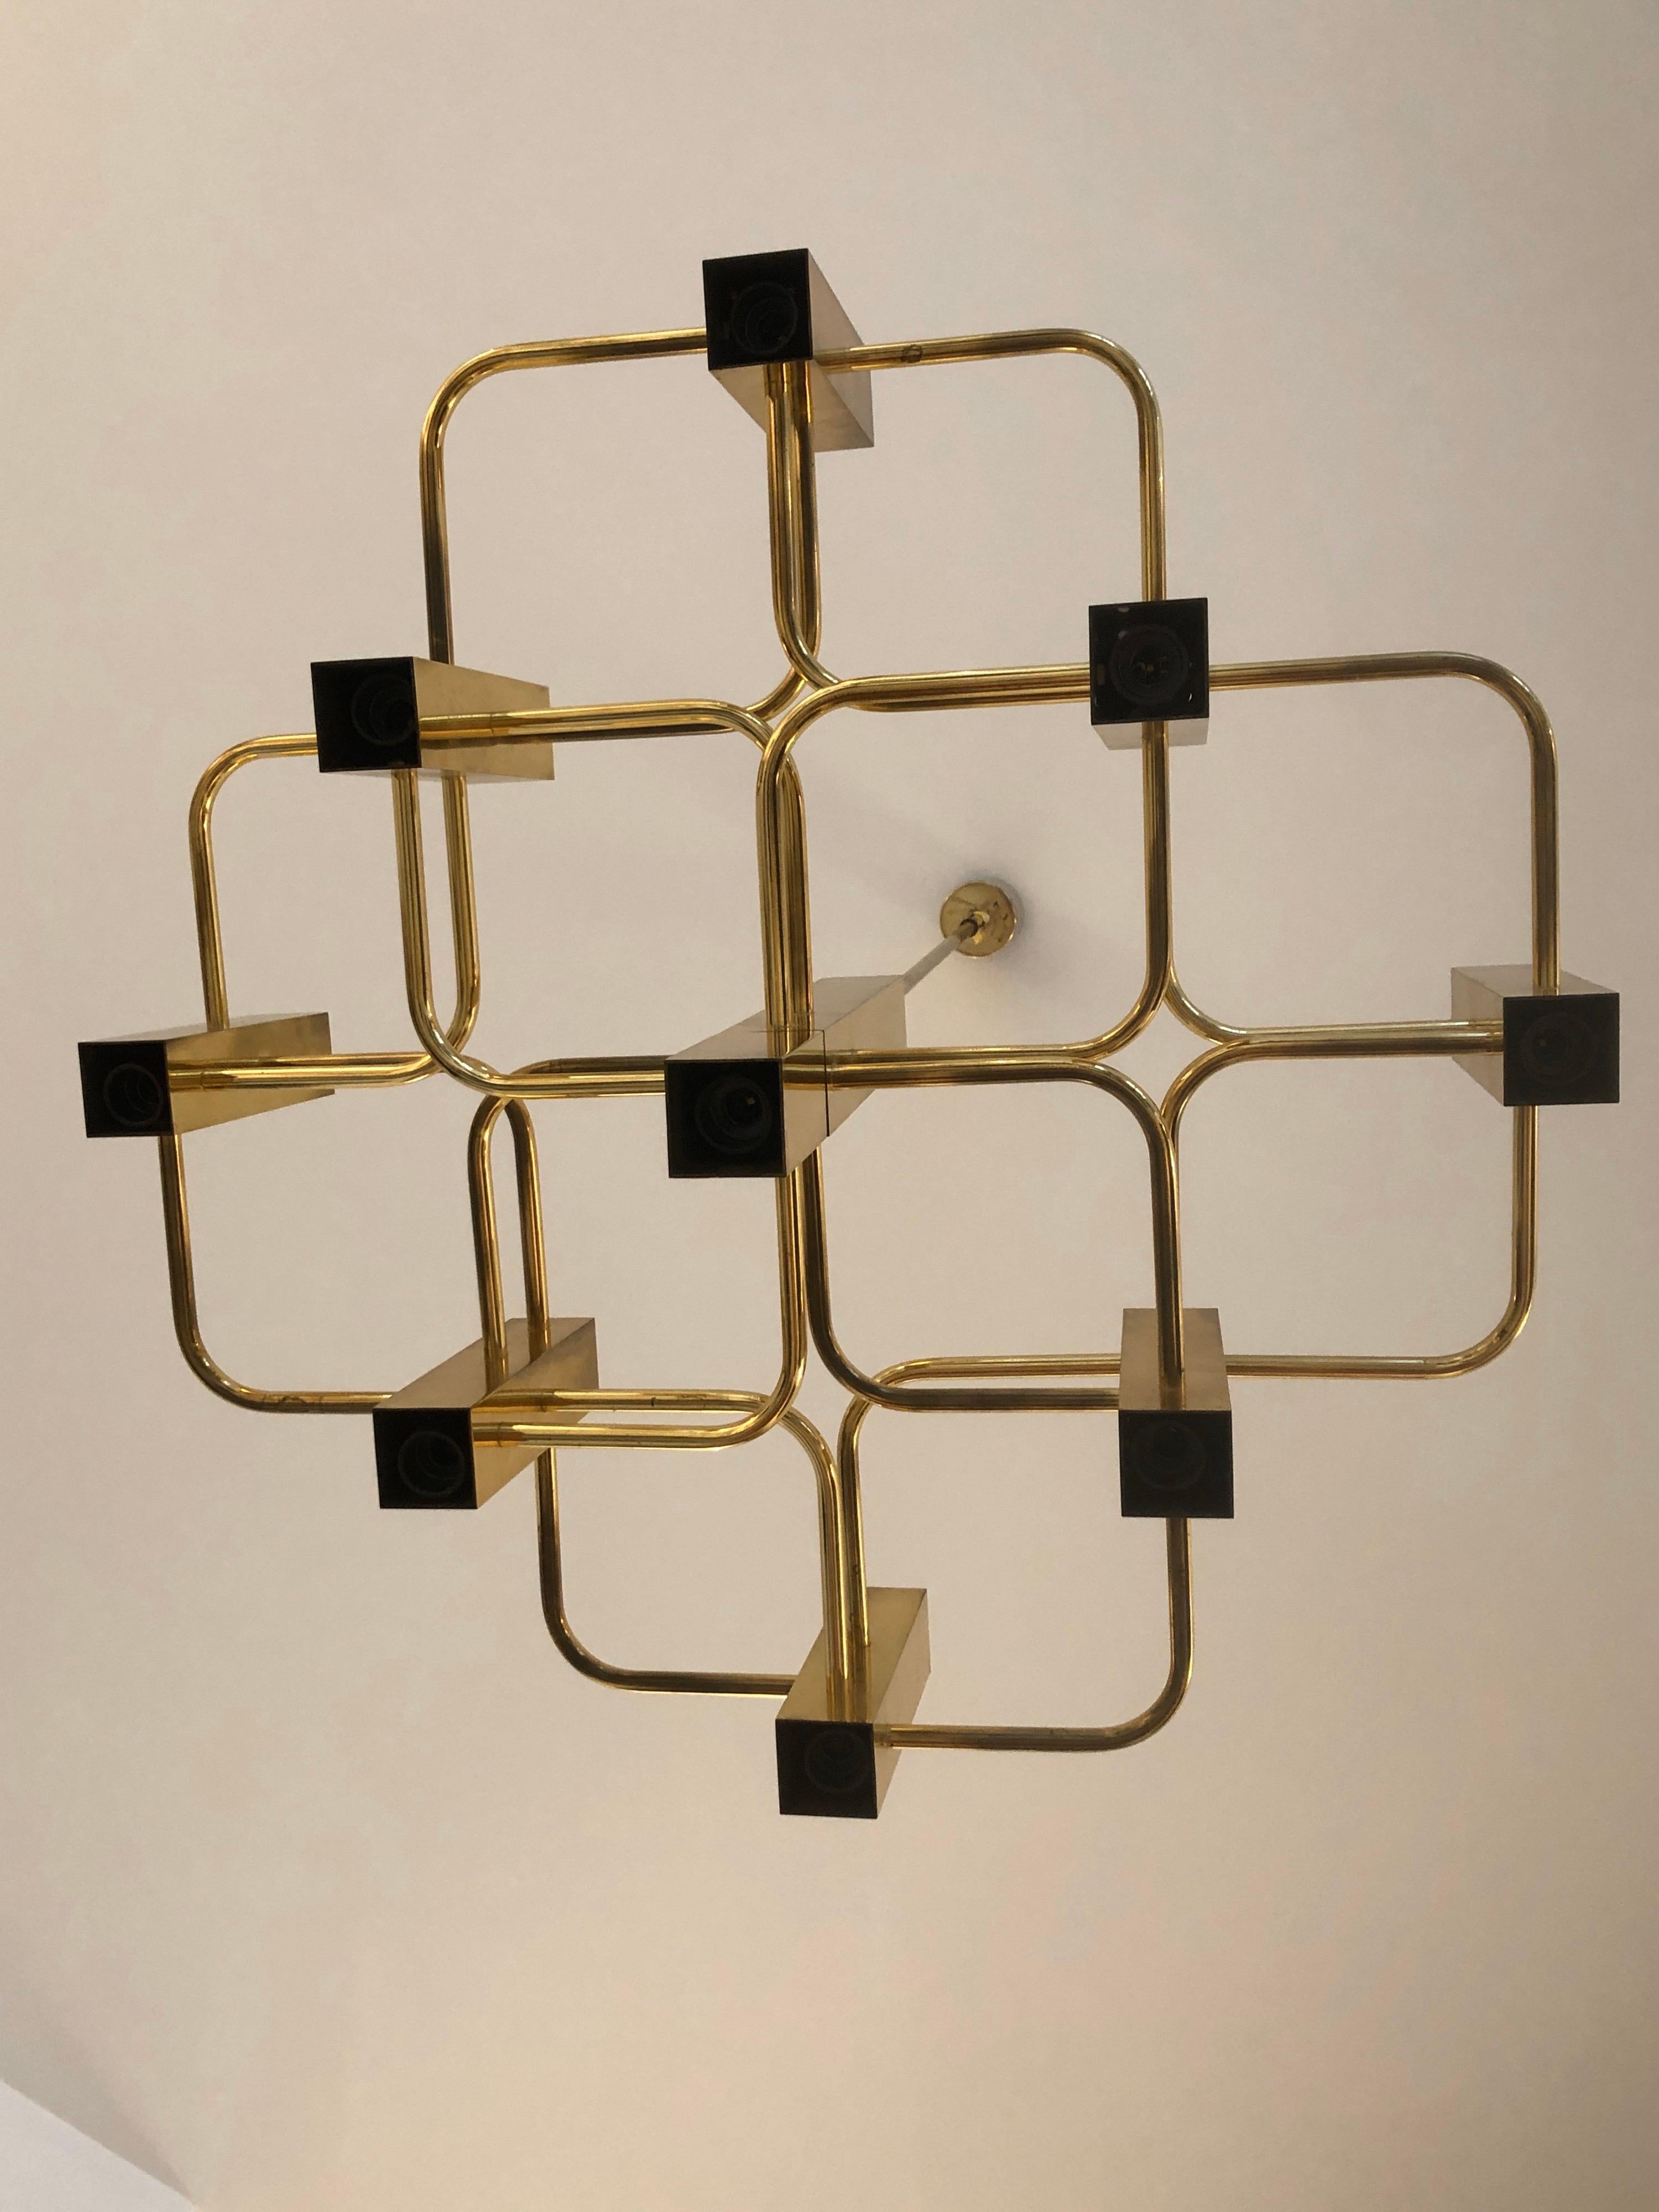 A stunning modernist chandelier Boulanger chandelier designed by Gaetano Sciolari in brass with 9 brass cubes lights surrounding a center support that form a geometrical pattern. 
Each light fitting can be pushed inside its frame to suit different